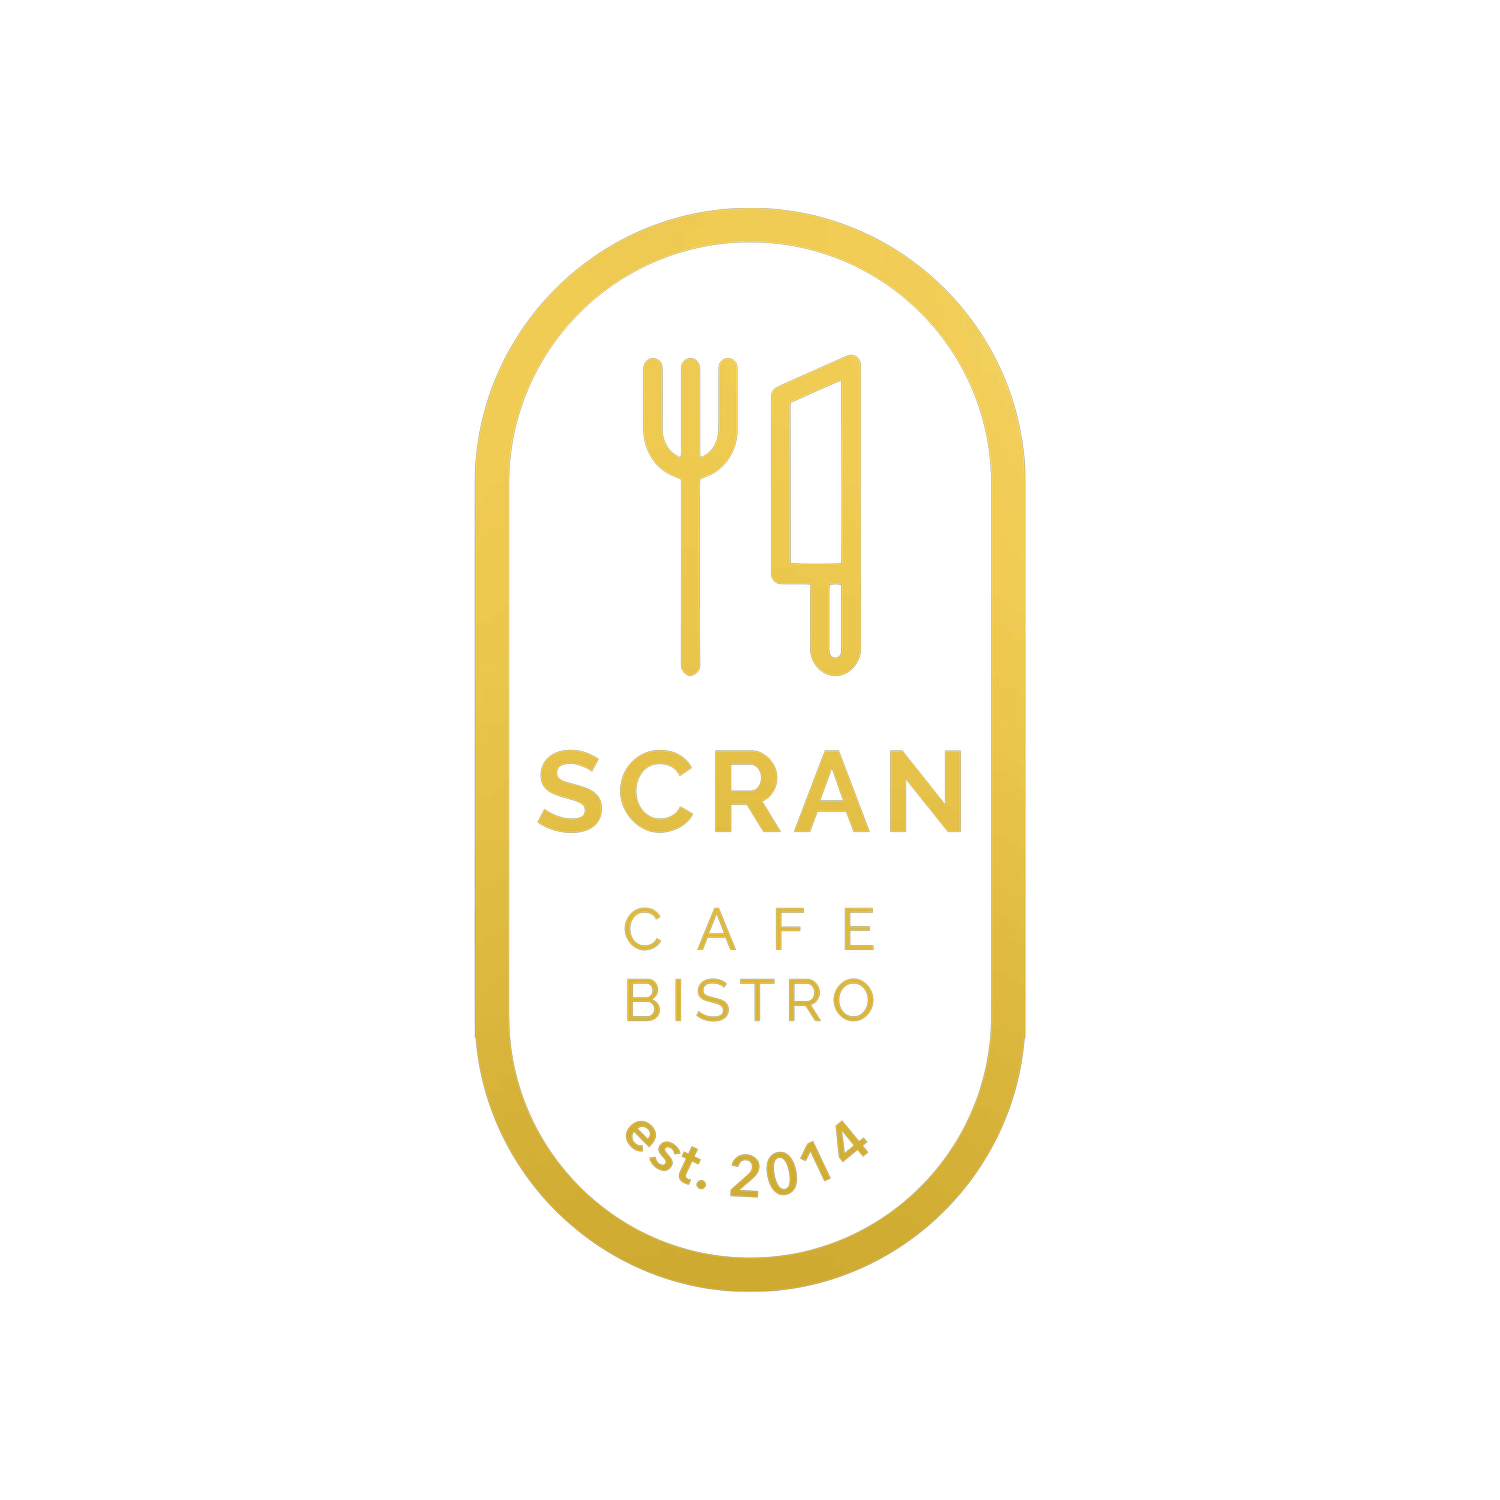 WELCOME TO SCRAN BISTRO